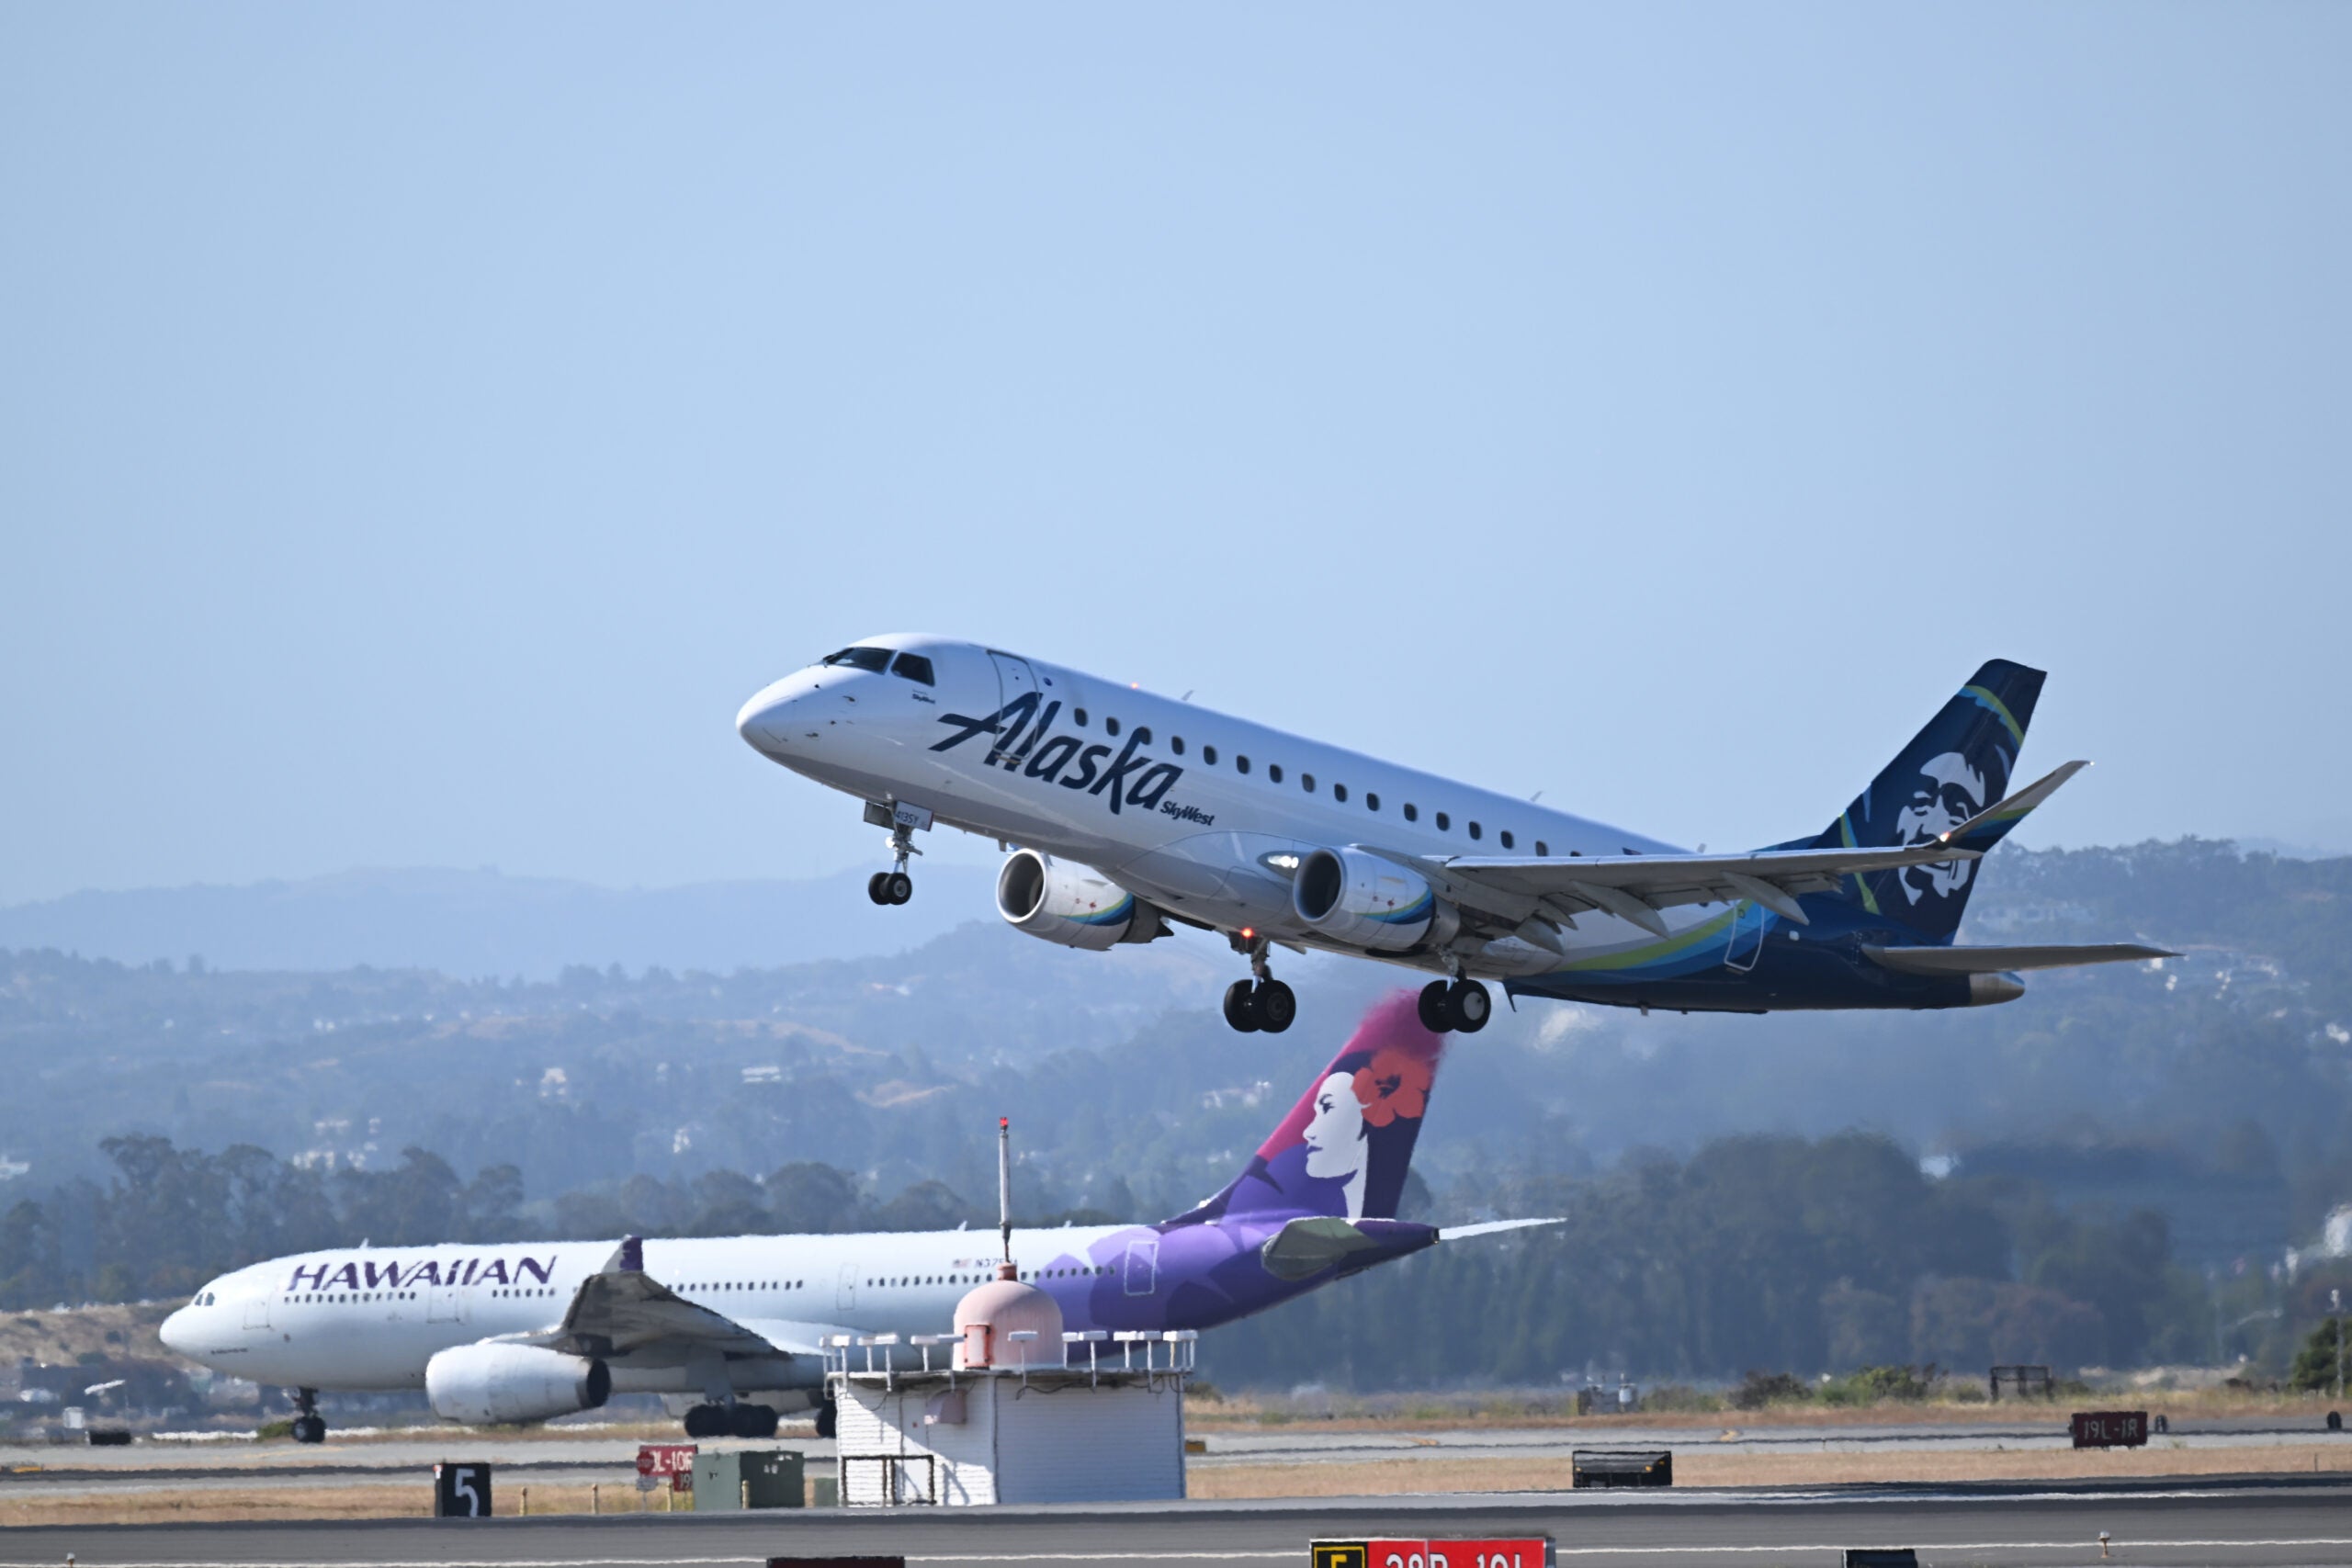 Sunday surprise: Alaska Airlines and Hawaiian Airlines to merge